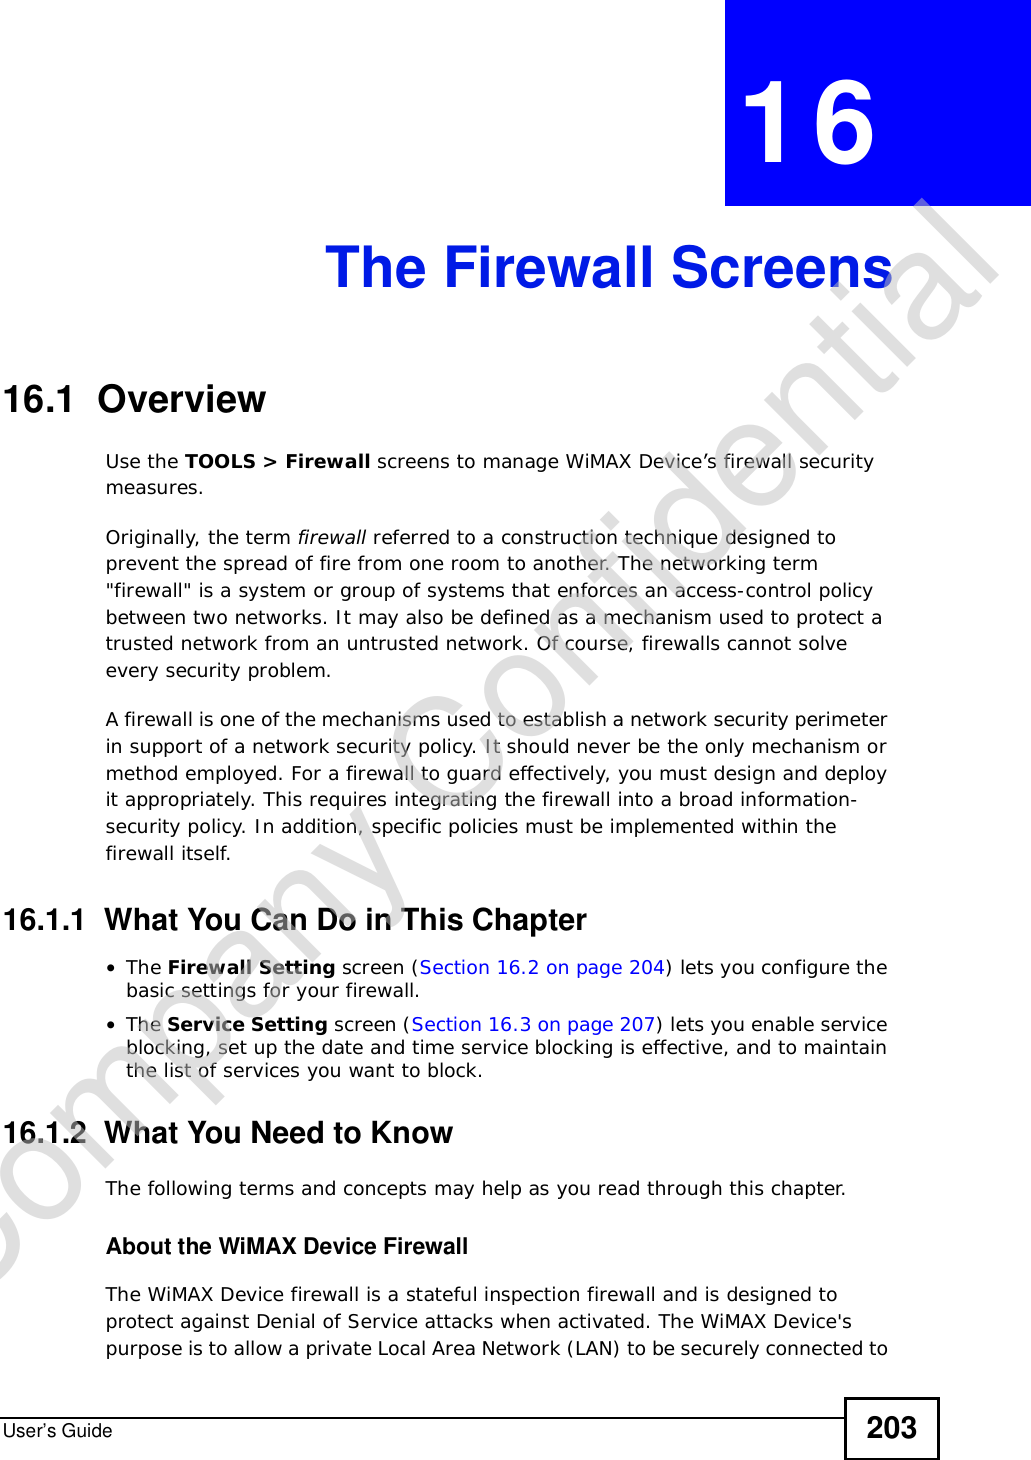 User’s Guide 203CHAPTER 16The Firewall Screens16.1  OverviewUse the TOOLS &gt; Firewall screens to manage WiMAX Device’s firewall security measures.Originally, the term firewall referred to a construction technique designed to prevent the spread of fire from one room to another. The networking term &quot;firewall&quot; is a system or group of systems that enforces an access-control policy between two networks. It may also be defined as a mechanism used to protect a trusted network from an untrusted network. Of course, firewalls cannot solve every security problem.A firewall is one of the mechanisms used to establish a network security perimeter in support of a network security policy. It should never be the only mechanism or method employed. For a firewall to guard effectively, you must design and deploy it appropriately. This requires integrating the firewall into a broad information-security policy. In addition, specific policies must be implemented within the firewall itself.16.1.1  What You Can Do in This Chapter•The Firewall Setting screen (Section 16.2 on page 204) lets you configure the basic settings for your firewall.•The Service Setting screen (Section 16.3 on page 207) lets you enable service blocking, set up the date and time service blocking is effective, and to maintain the list of services you want to block.16.1.2  What You Need to KnowThe following terms and concepts may help as you read through this chapter.About the WiMAX Device FirewallThe WiMAX Device firewall is a stateful inspection firewall and is designed to protect against Denial of Service attacks when activated. The WiMAX Device&apos;s purpose is to allow a private Local Area Network (LAN) to be securely connected to Company Confidential